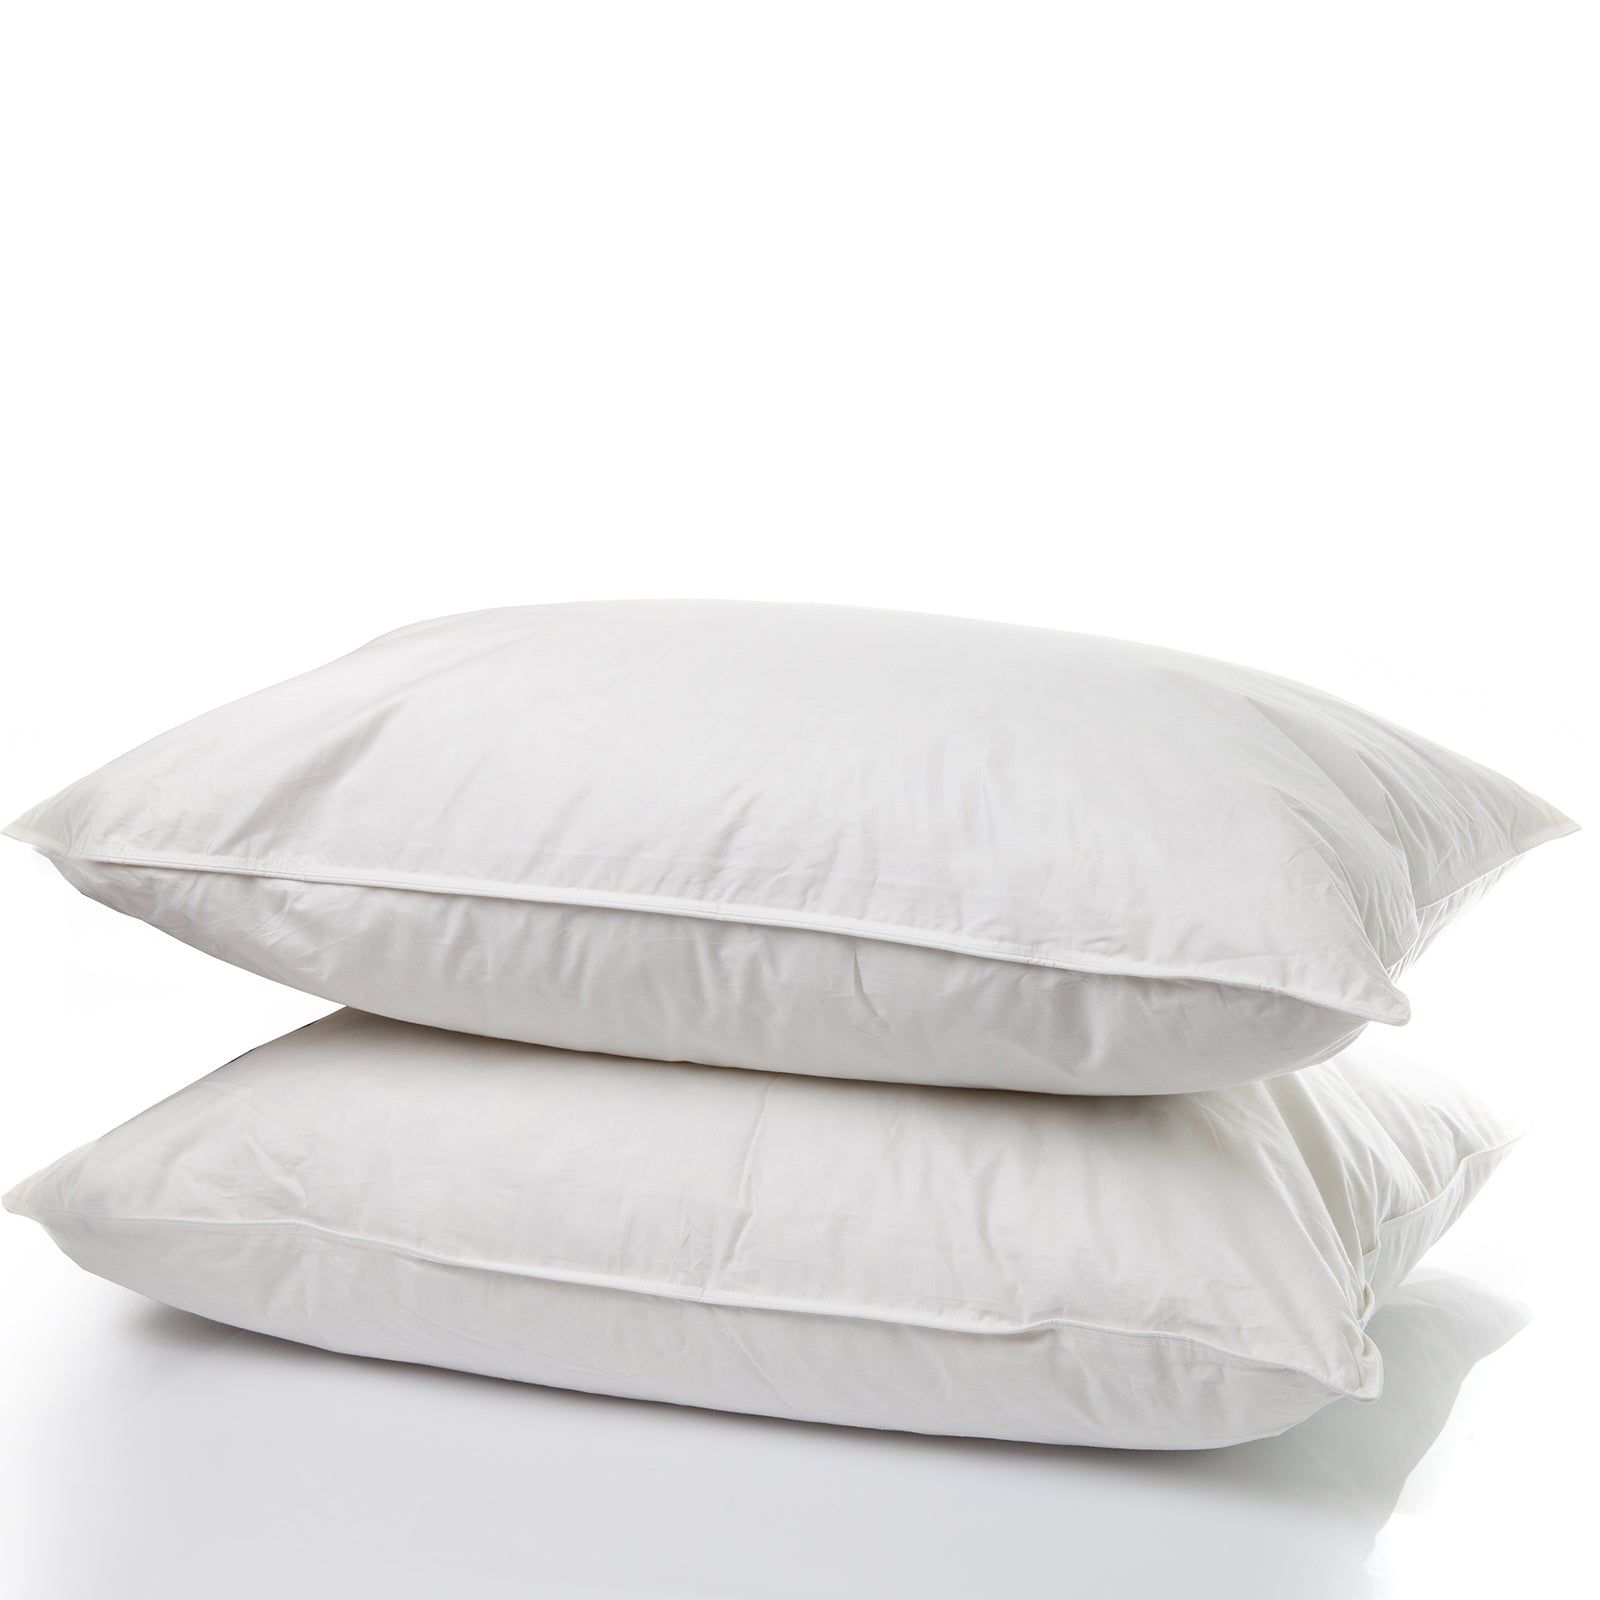 Down Pillows: Stay Cozy and Comfortable with Down Pillows